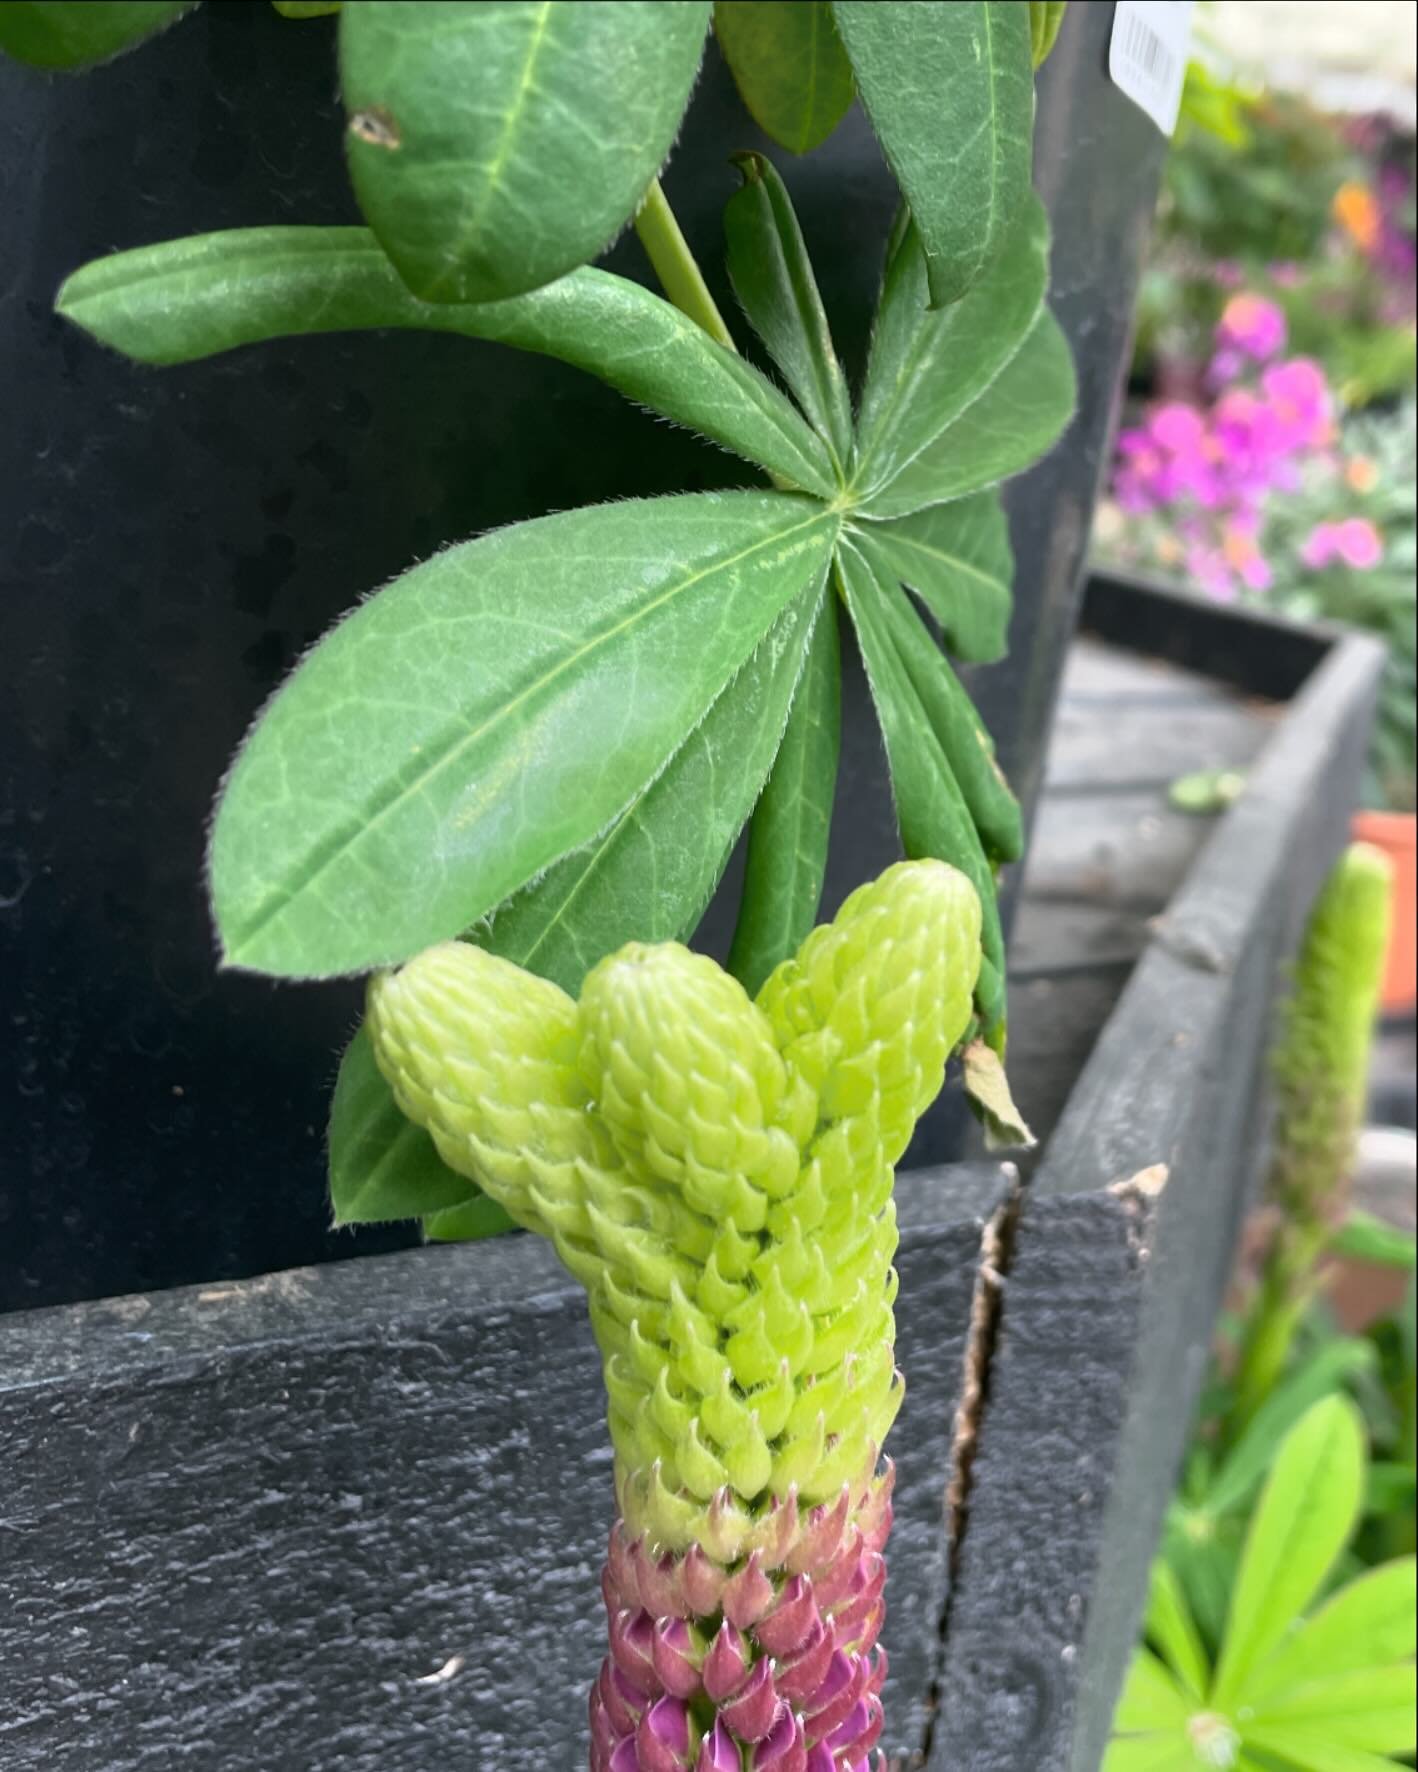 You do you, boo.
Spotted this Lupine at a garden store deciding to do its own thing. 
Fasciation with some dazzling Fibonacci 😂

Fasciation is a genetic mutation in plants- 

Fibonacci - a sequence of numbers- pattern where the next number in the se